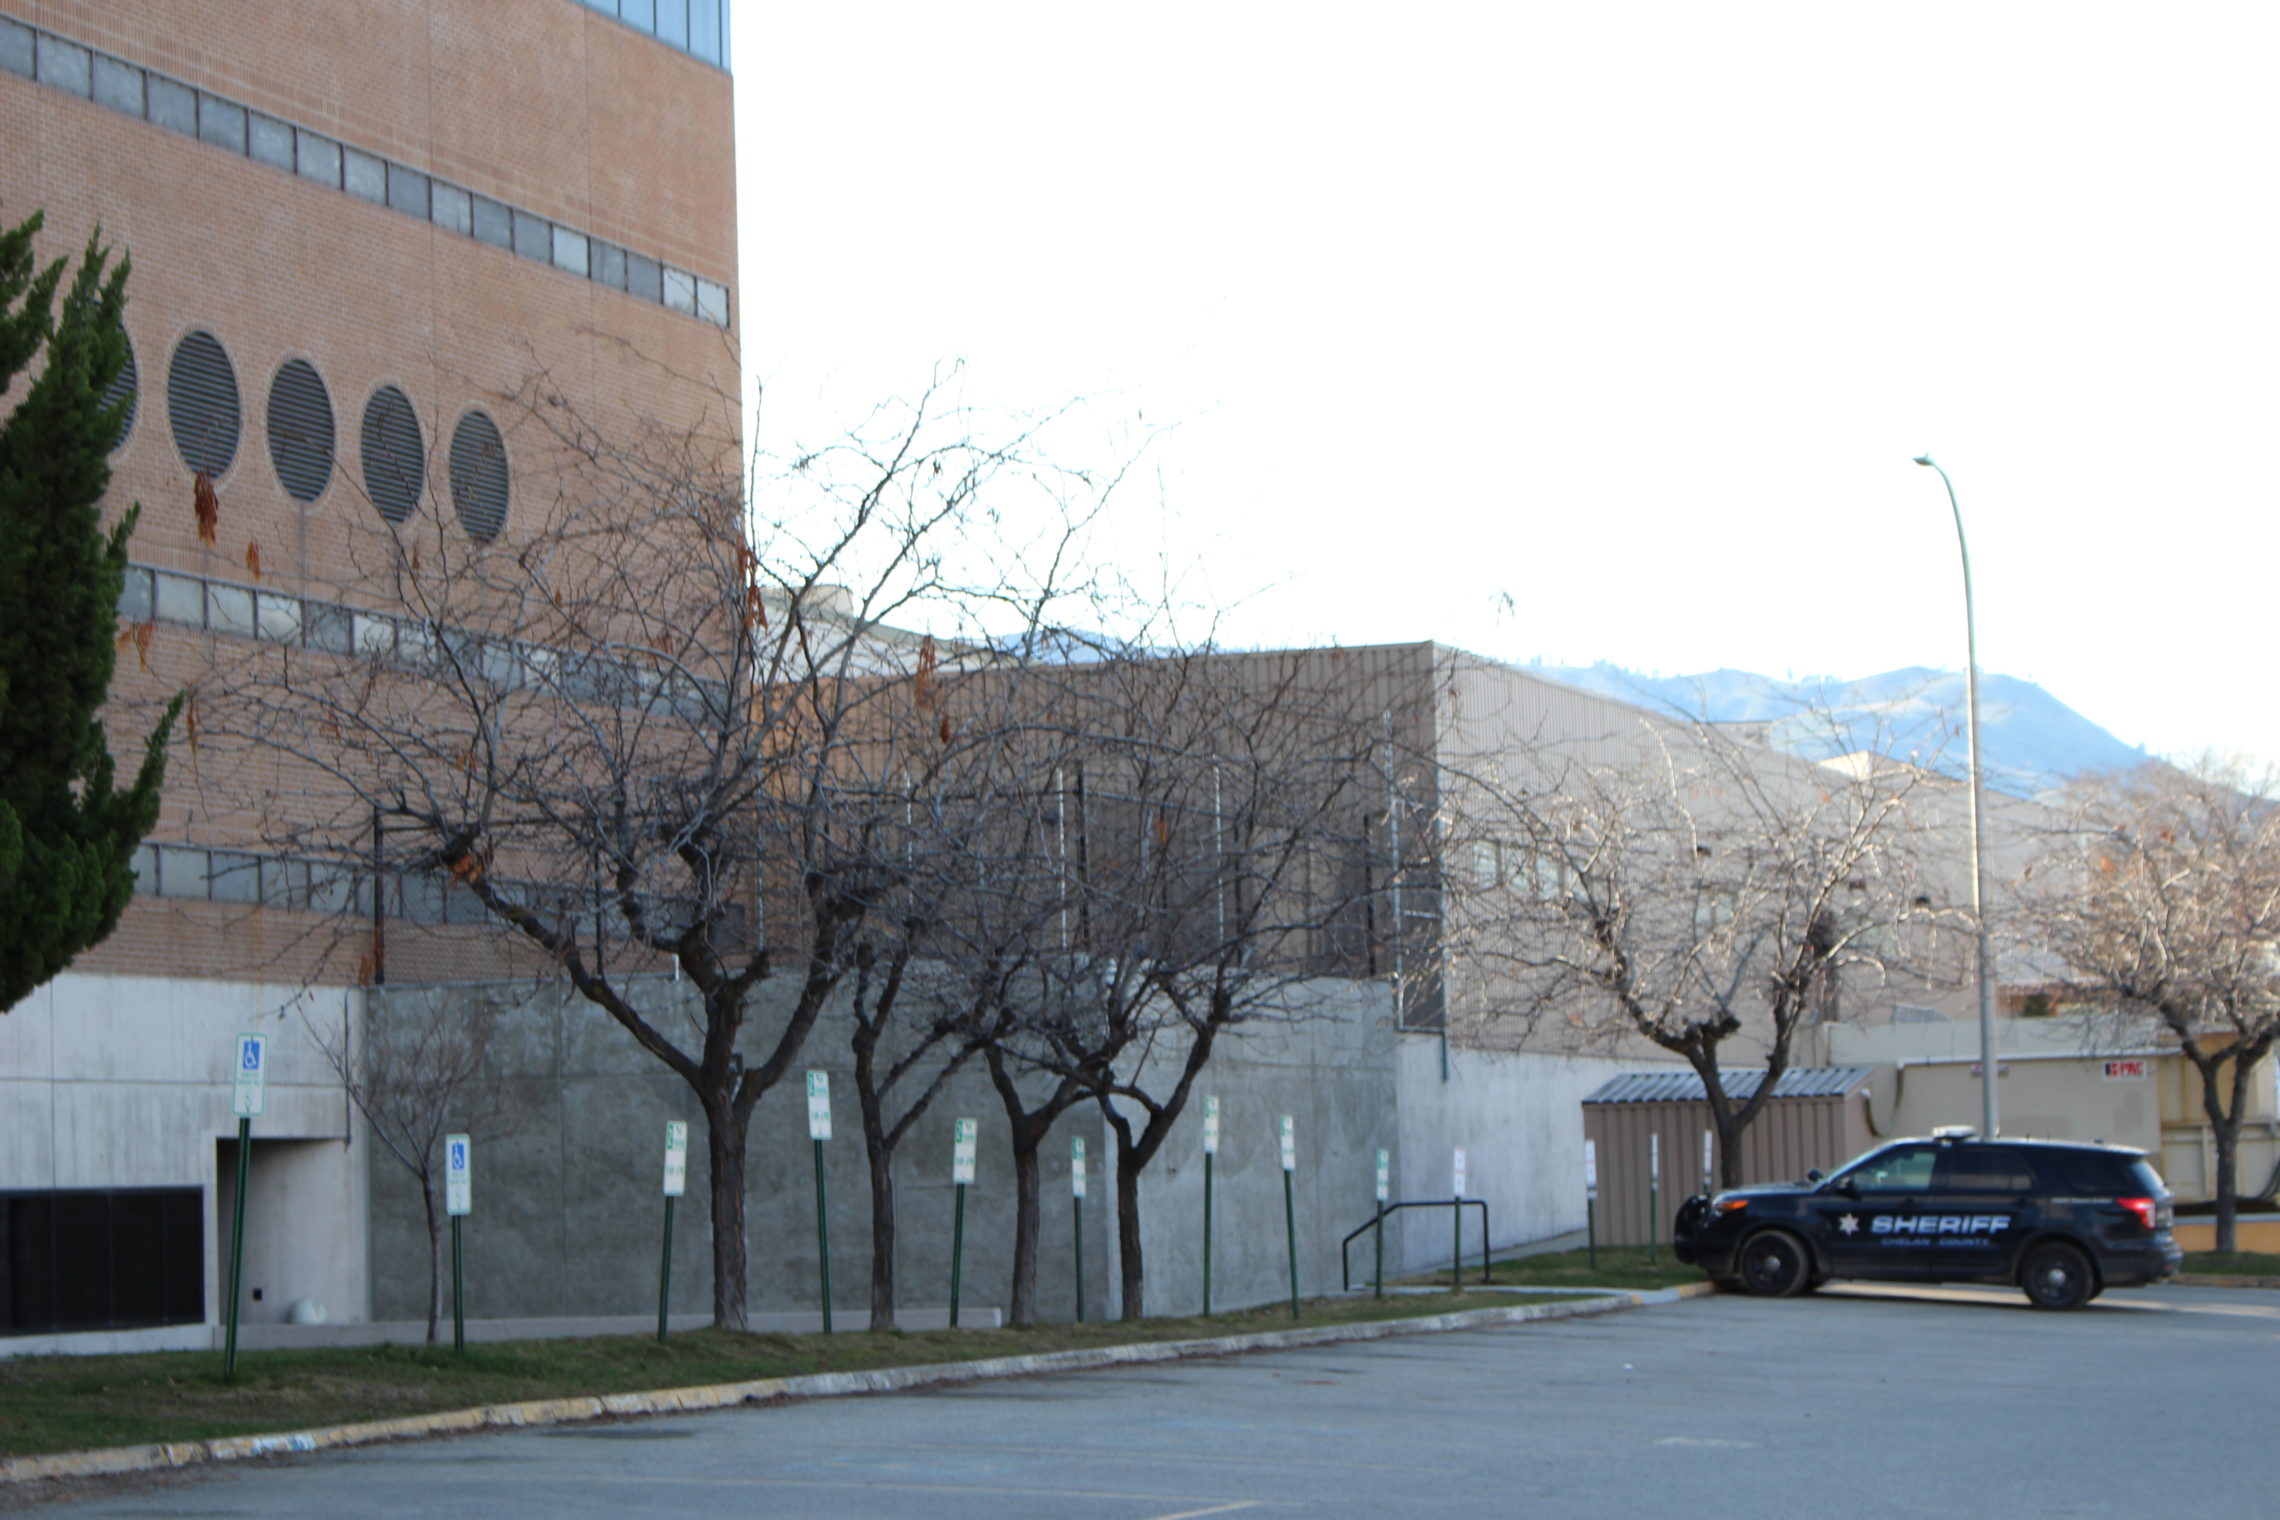 The Chelan County Jail, where Jeremy Lavendar died while unconvicted of a crime under the law. His family says his time in the Army led to drug use and mental health issues in his life, and that he needed treatment instead of being sent to jail. CREDIT: Sydney Brownstone/KUOW